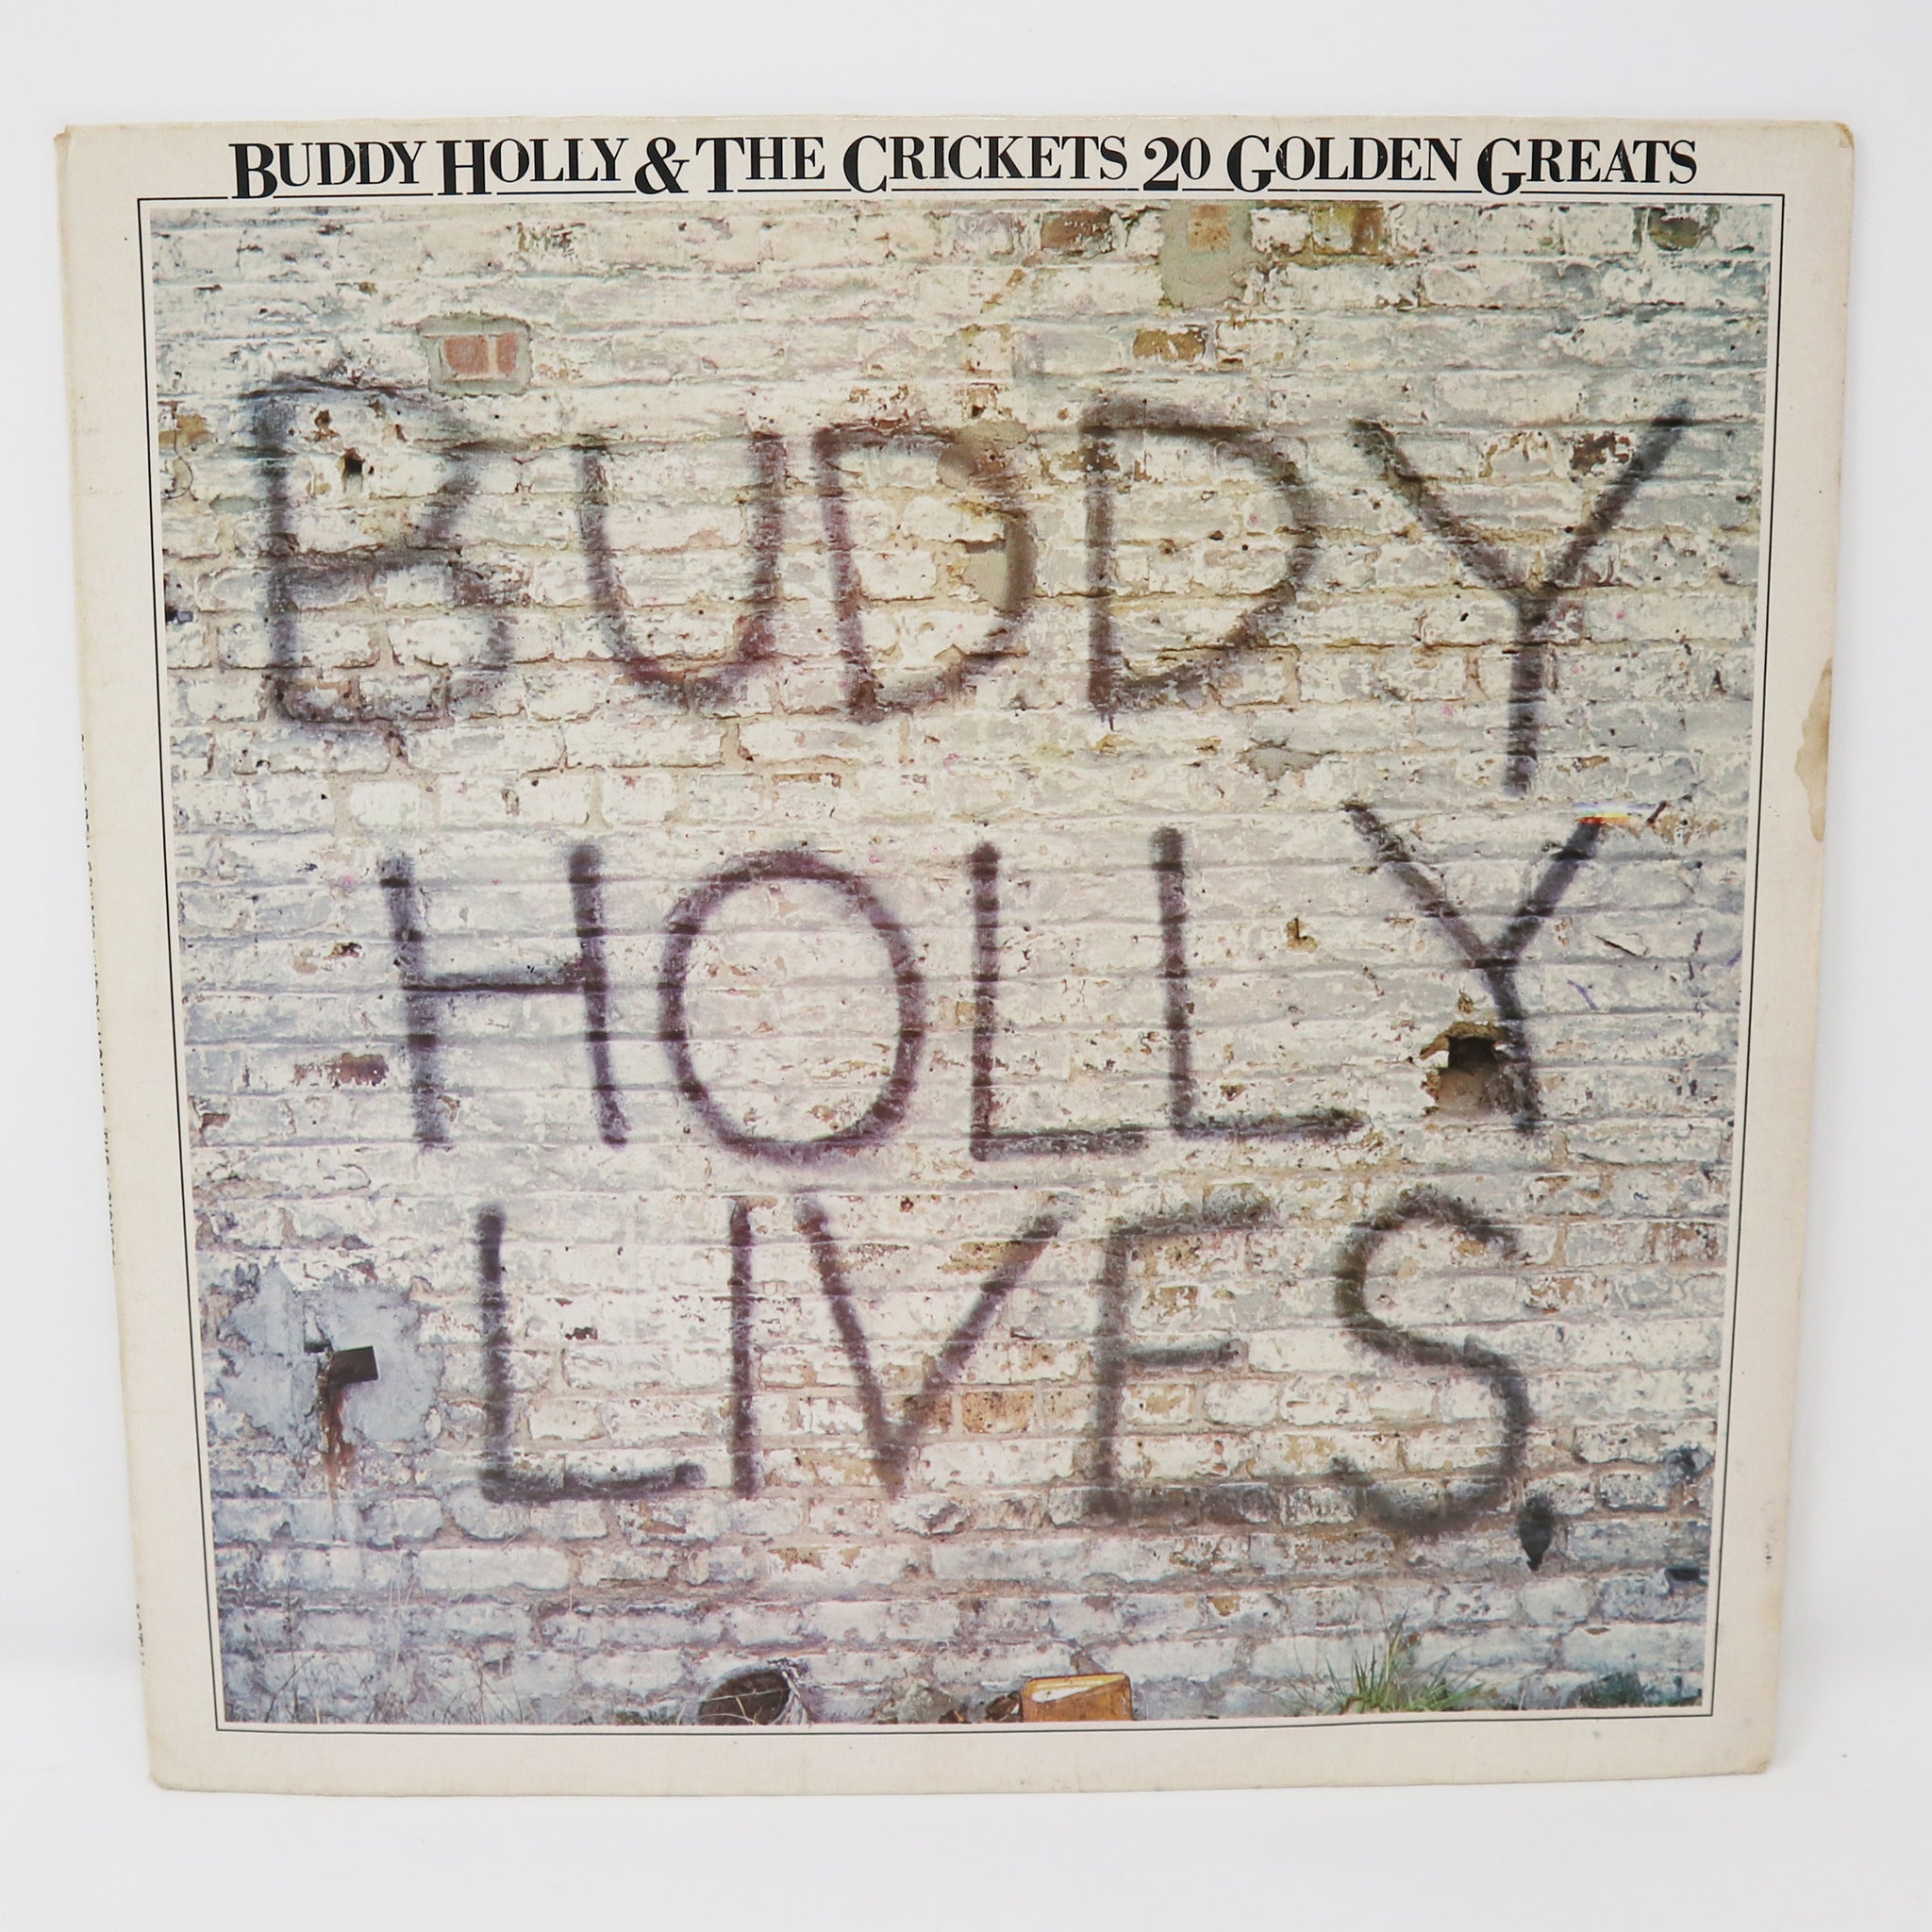 Vintage 1978 70s MCA Records Buddy Holly & The Crickets - 20 Golden Greats Compilation 12" LP Album Vinyl Record Stereo UK Version